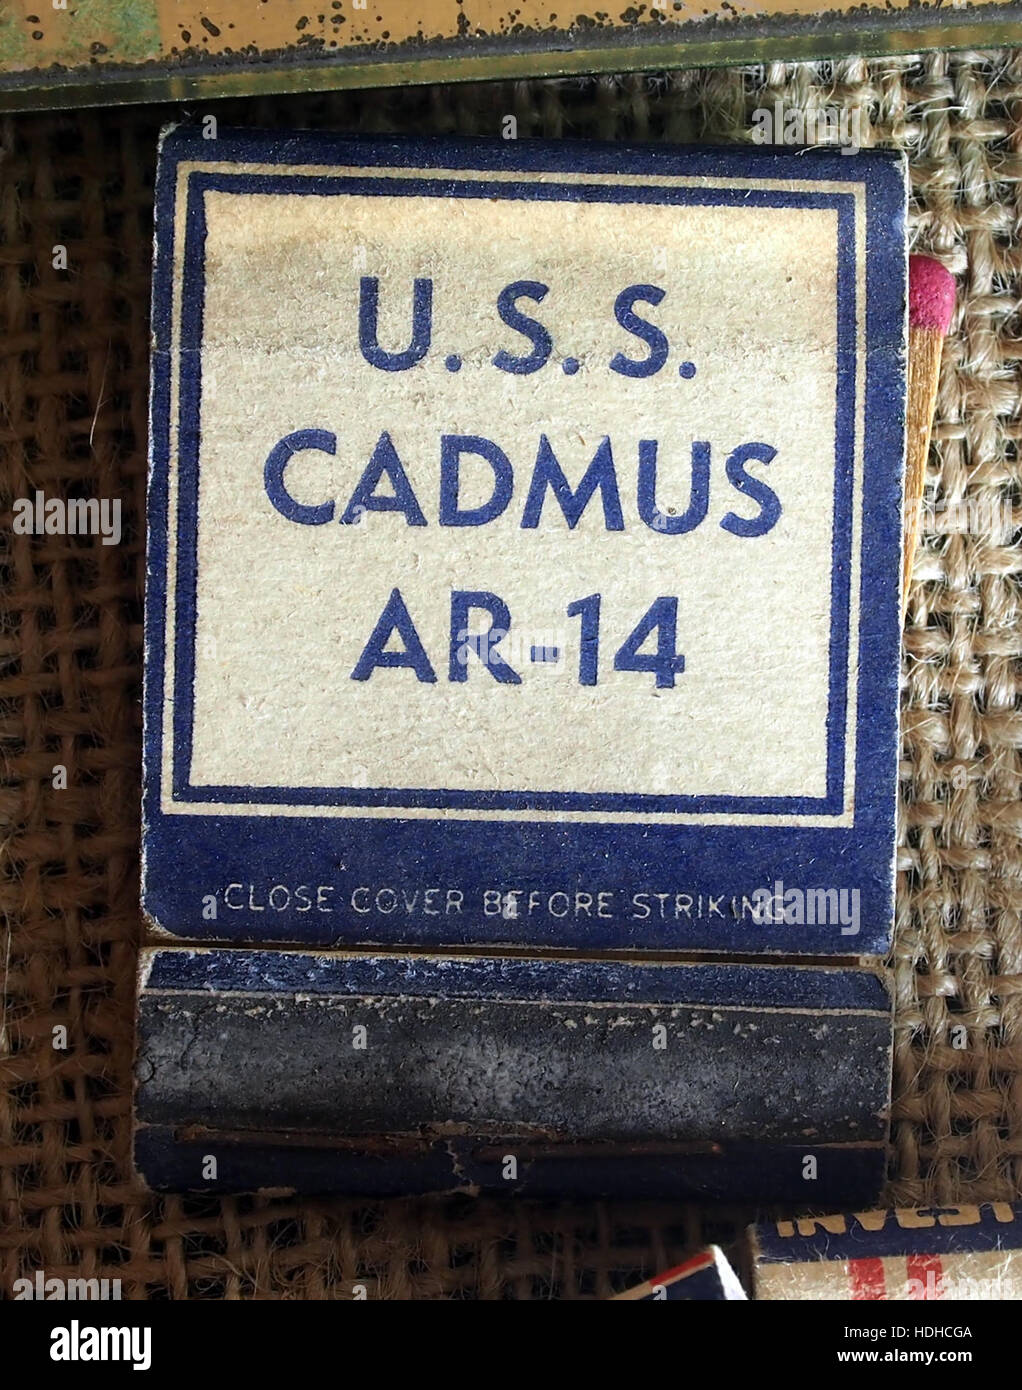 USS Cadmo. AR-14 matchbox, Museo Inverno 1944 in Gingelom Foto Stock